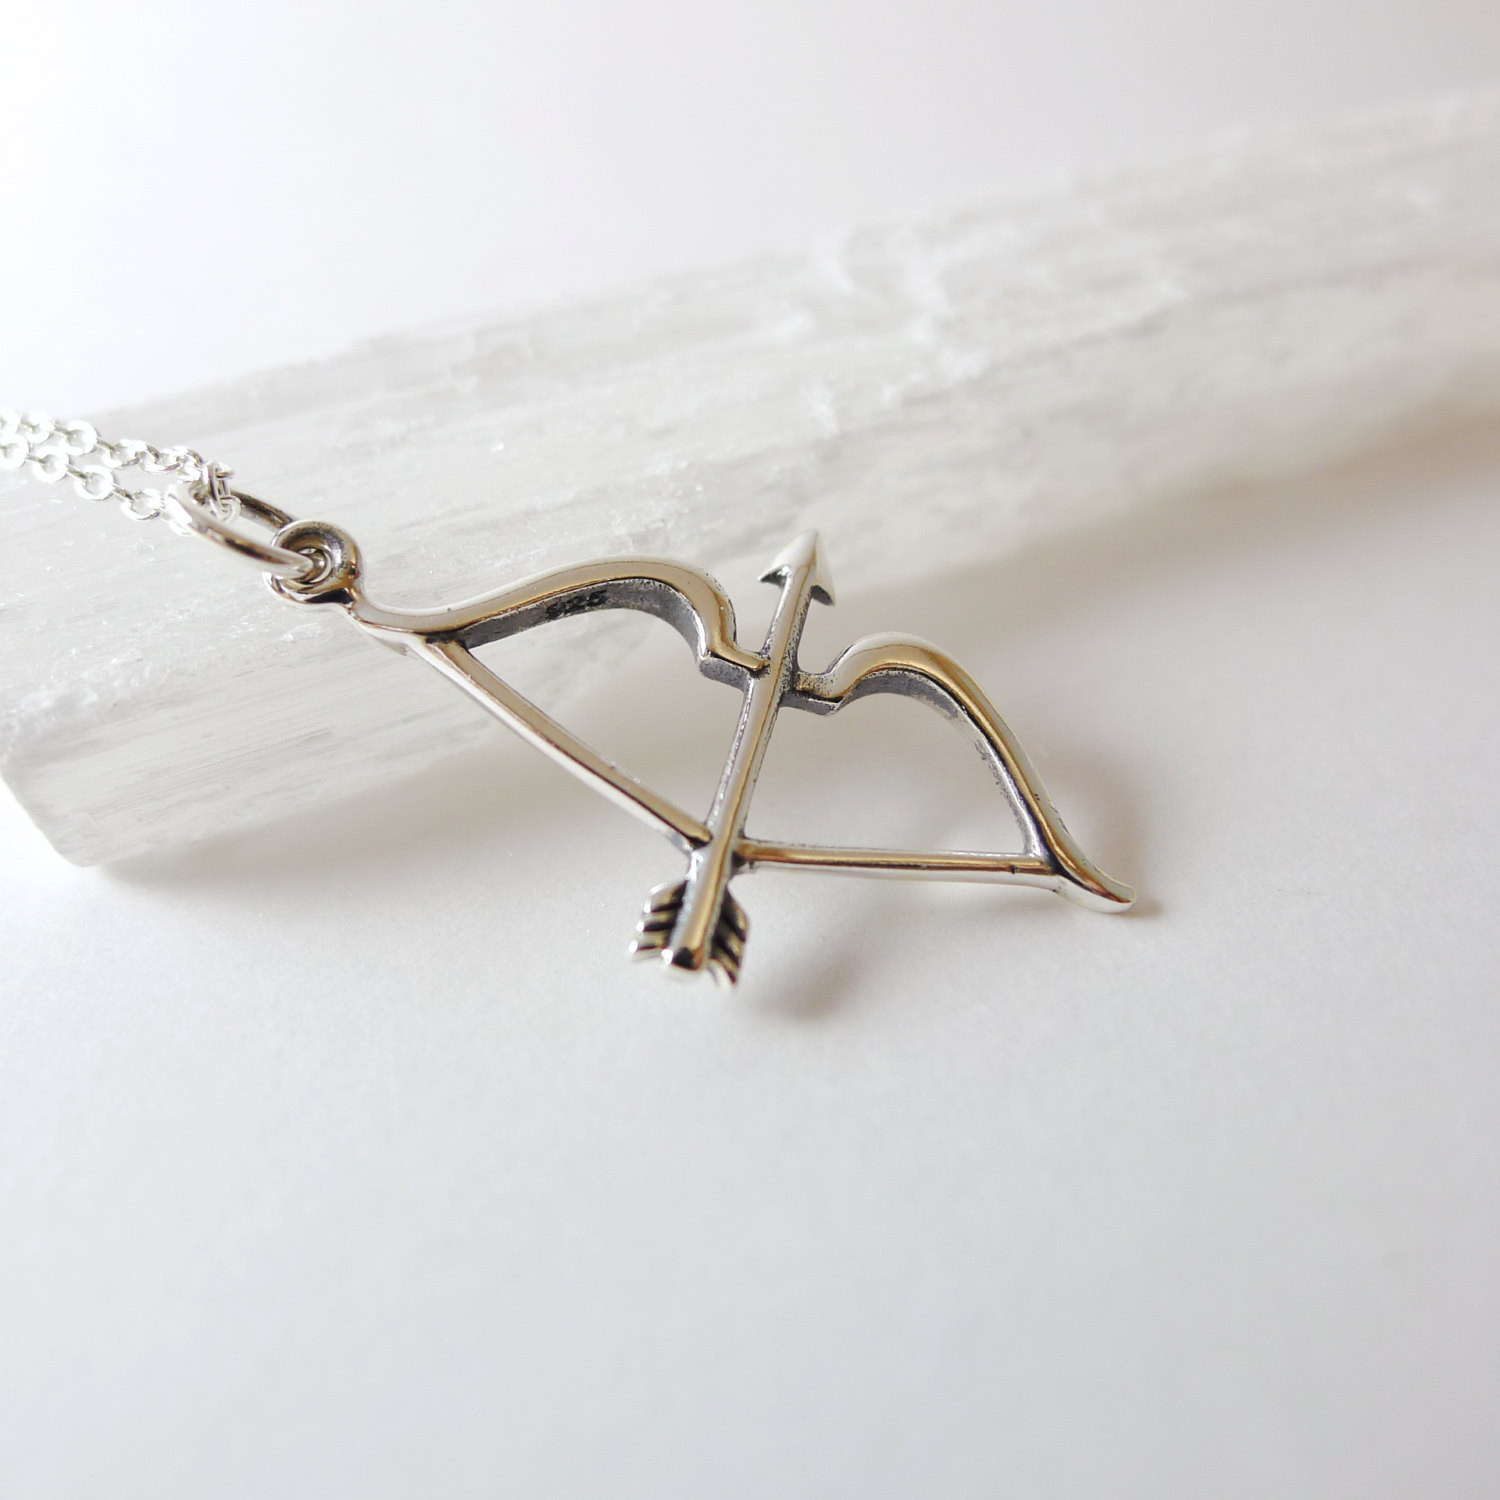 Bow And Arrow Necklace
 Bow and Arrow Charm Necklace 925 Silver 925 Silver Chain